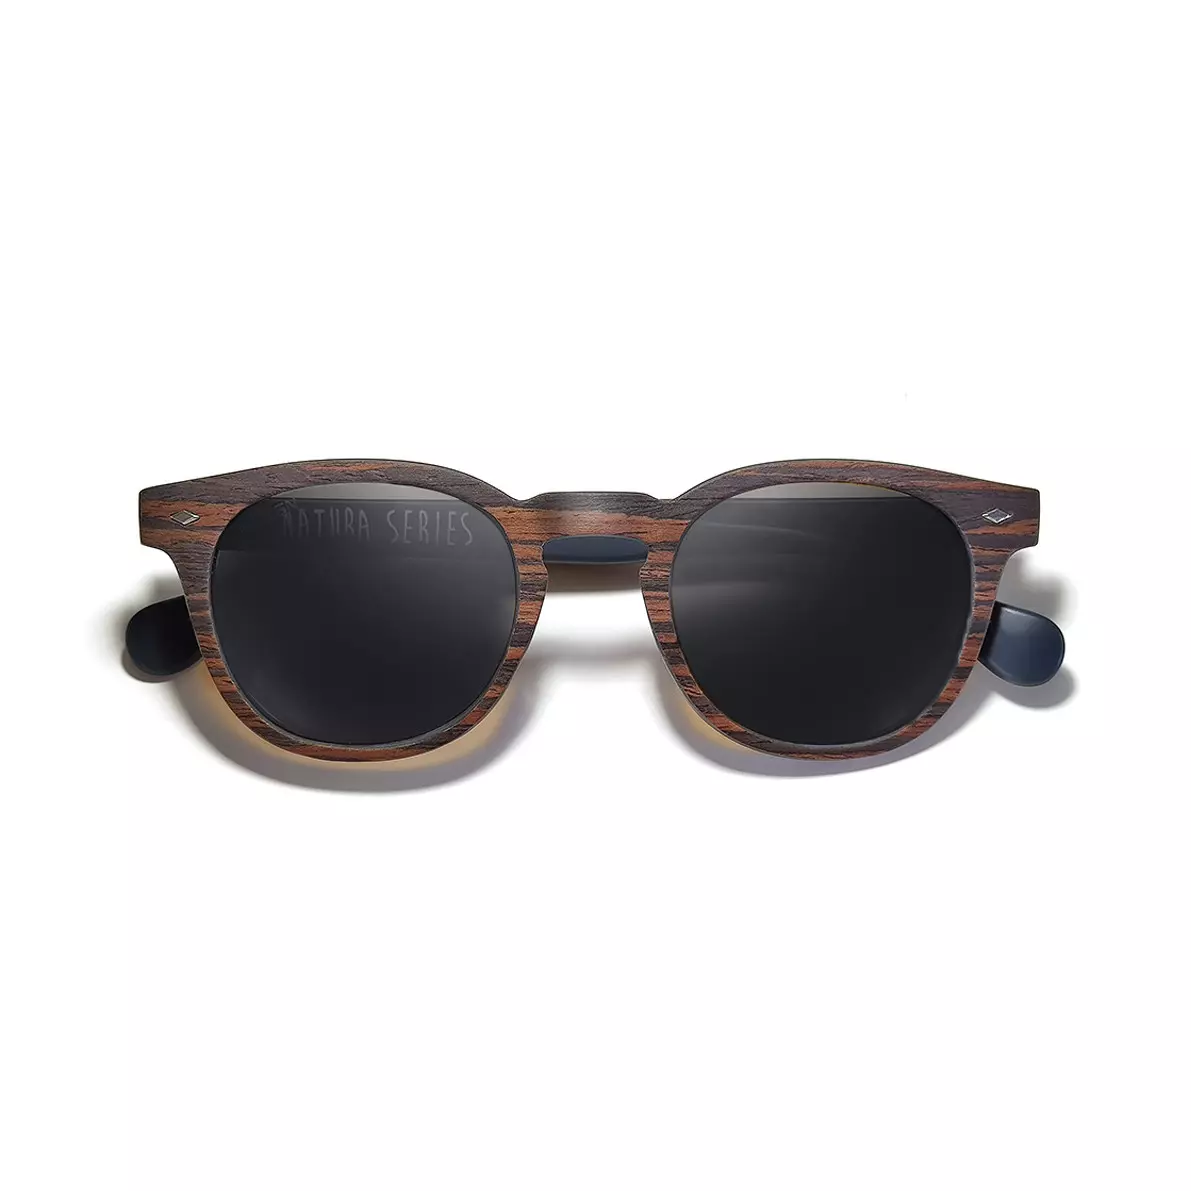 Sonnenbrille Modell: Woody Polarized